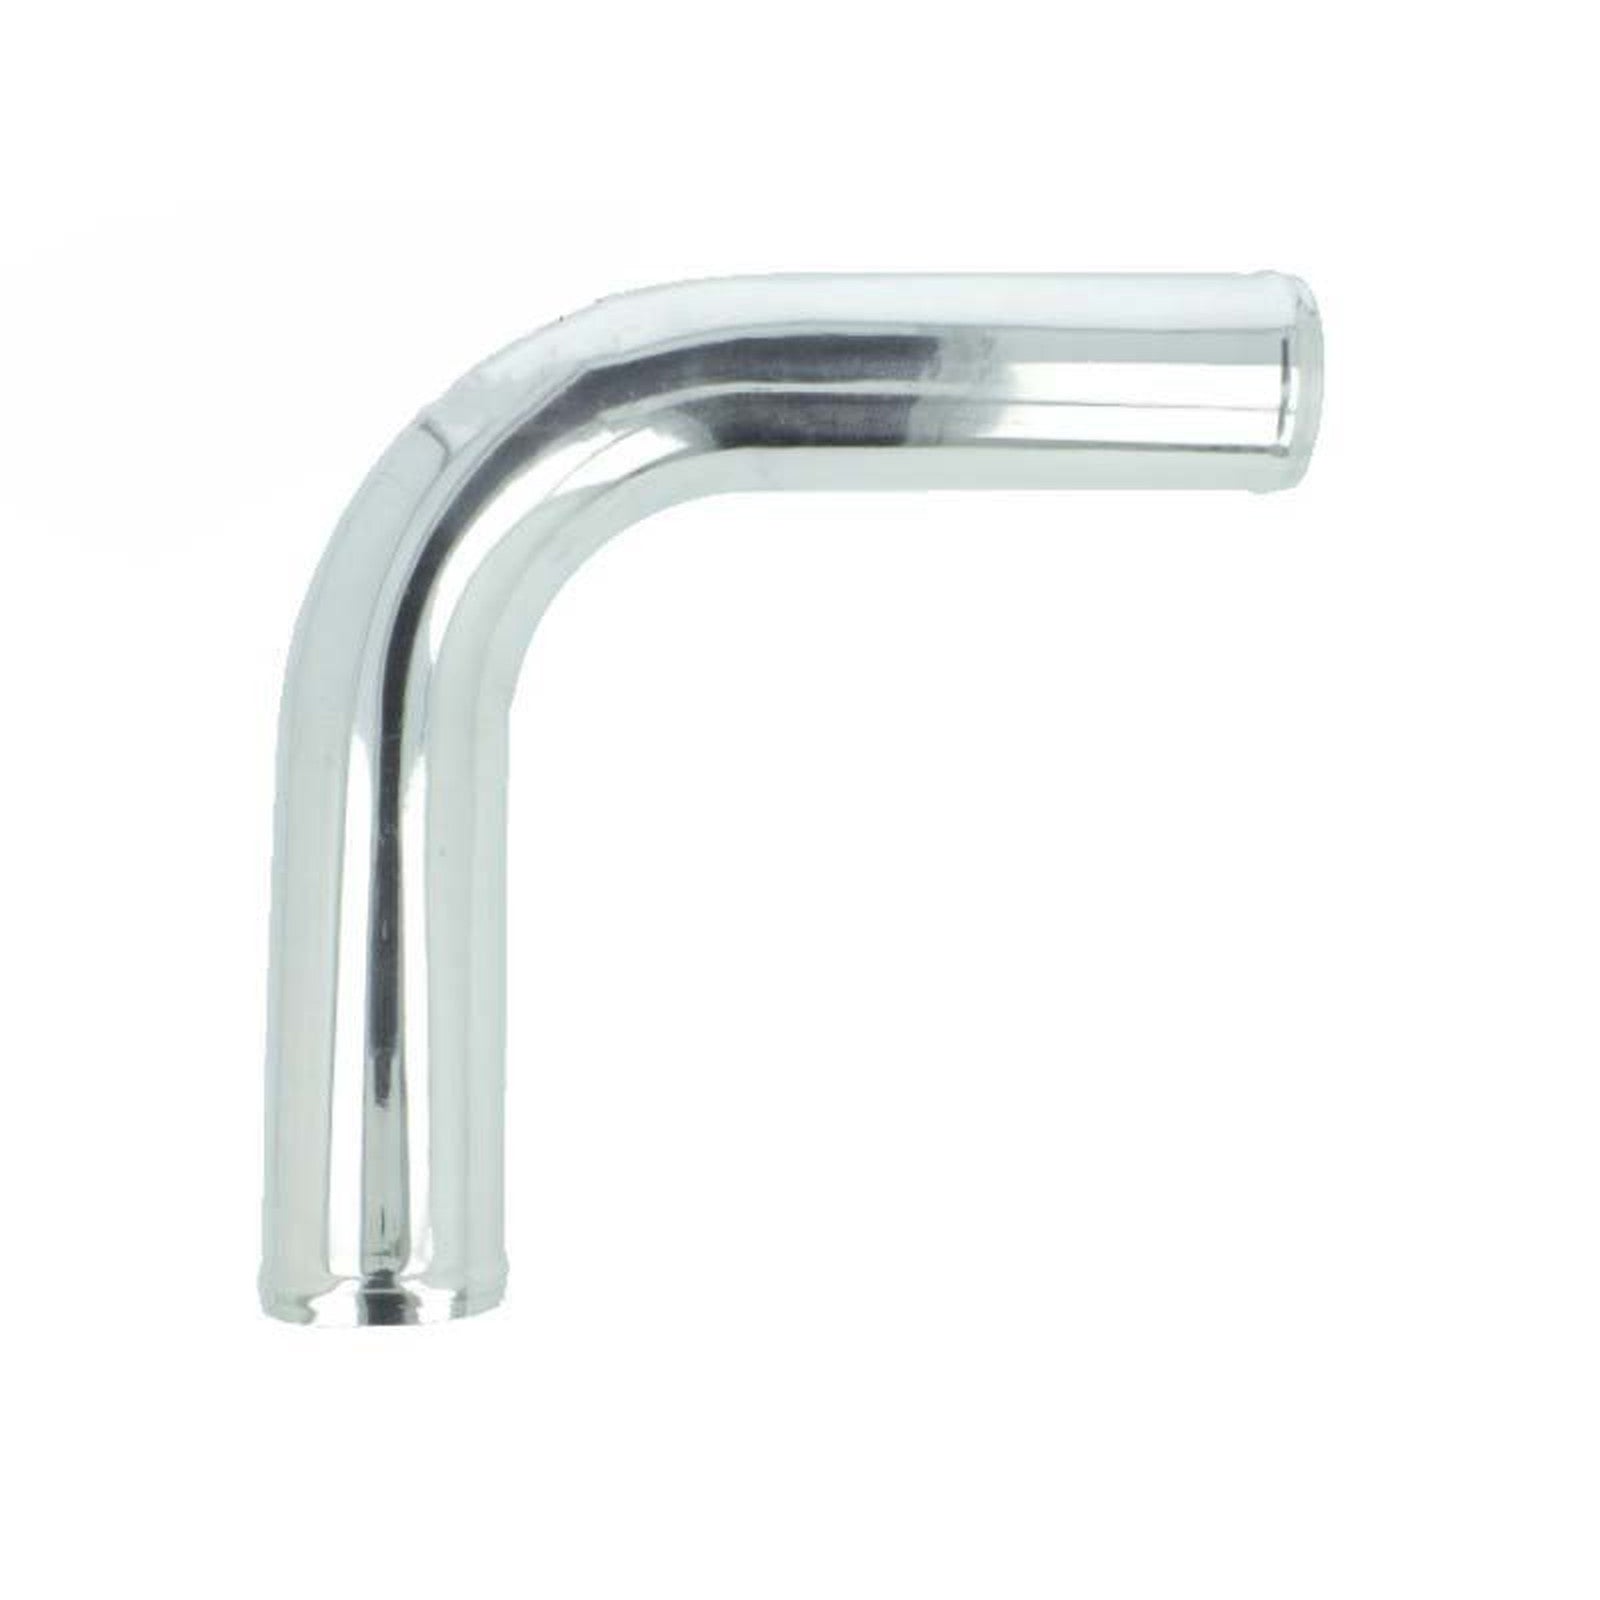 BOOST Products Aluminum Elbow 90 Degrees with 89mm (3-1/2") OD, Mandrel Bent, Polished